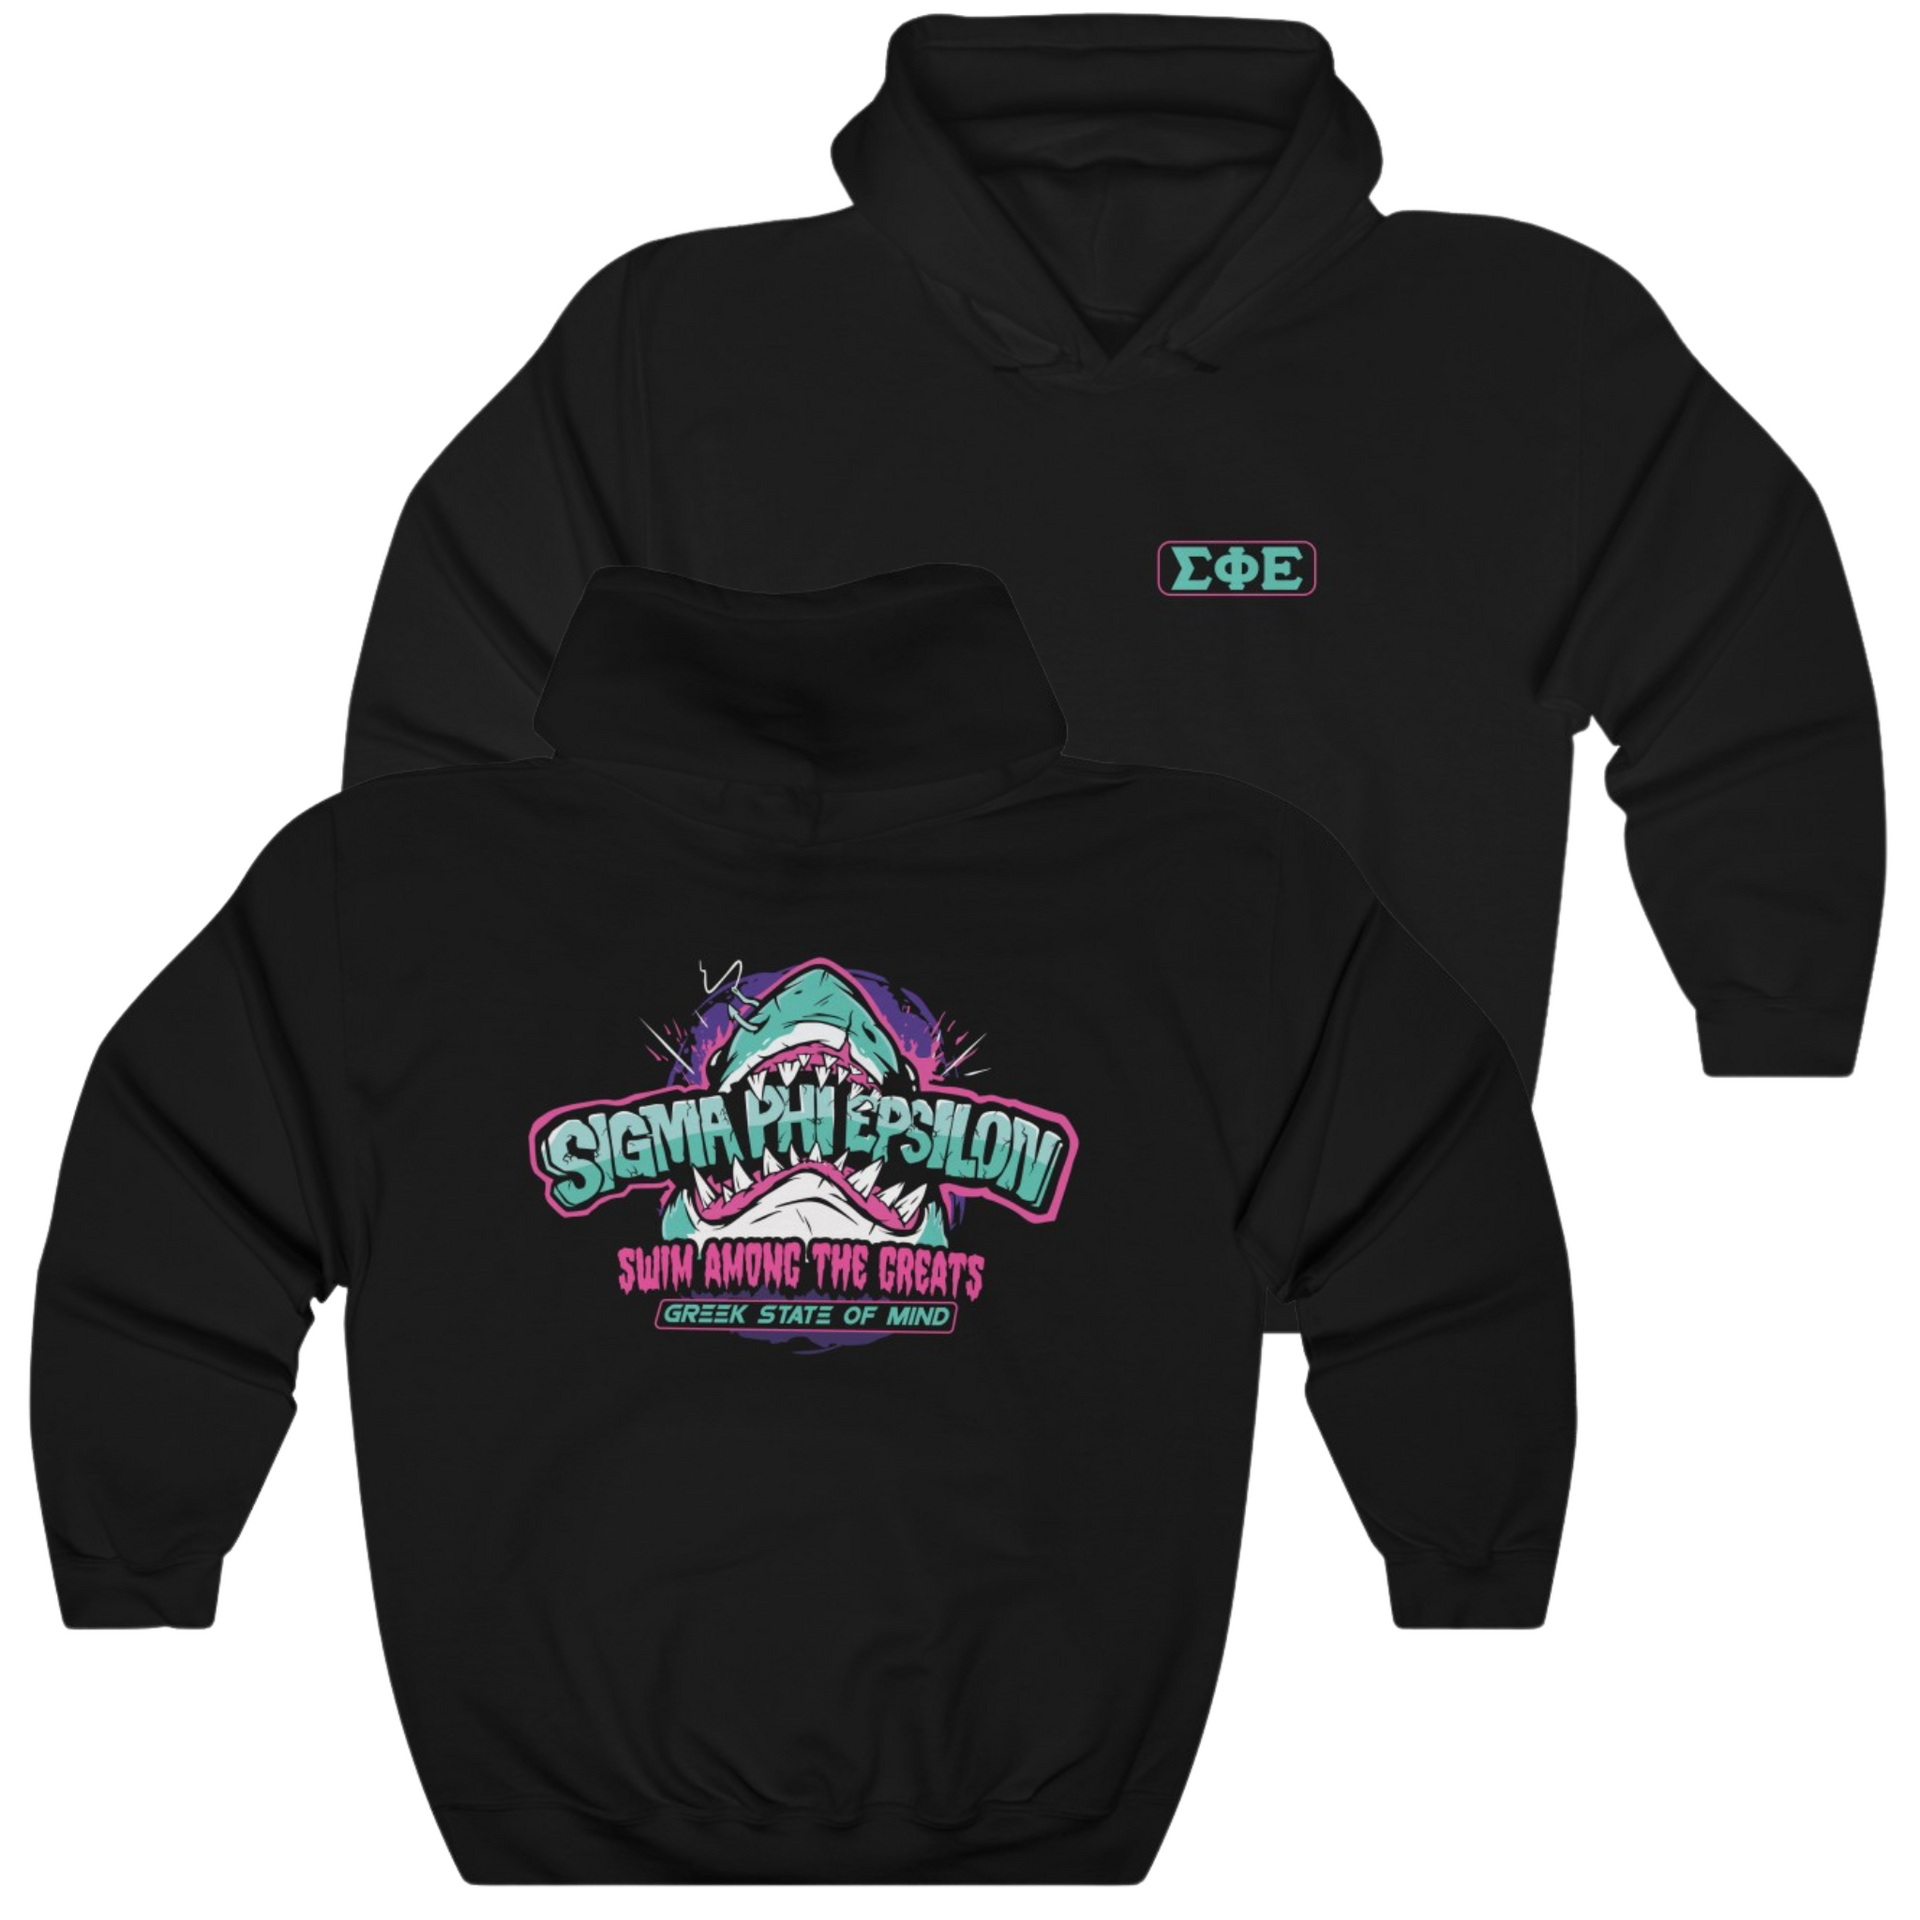 Black Sigma Phi Epsilon Graphic Hoodie | The Deep End | SigEp Fraternity Clothes and Merchandise